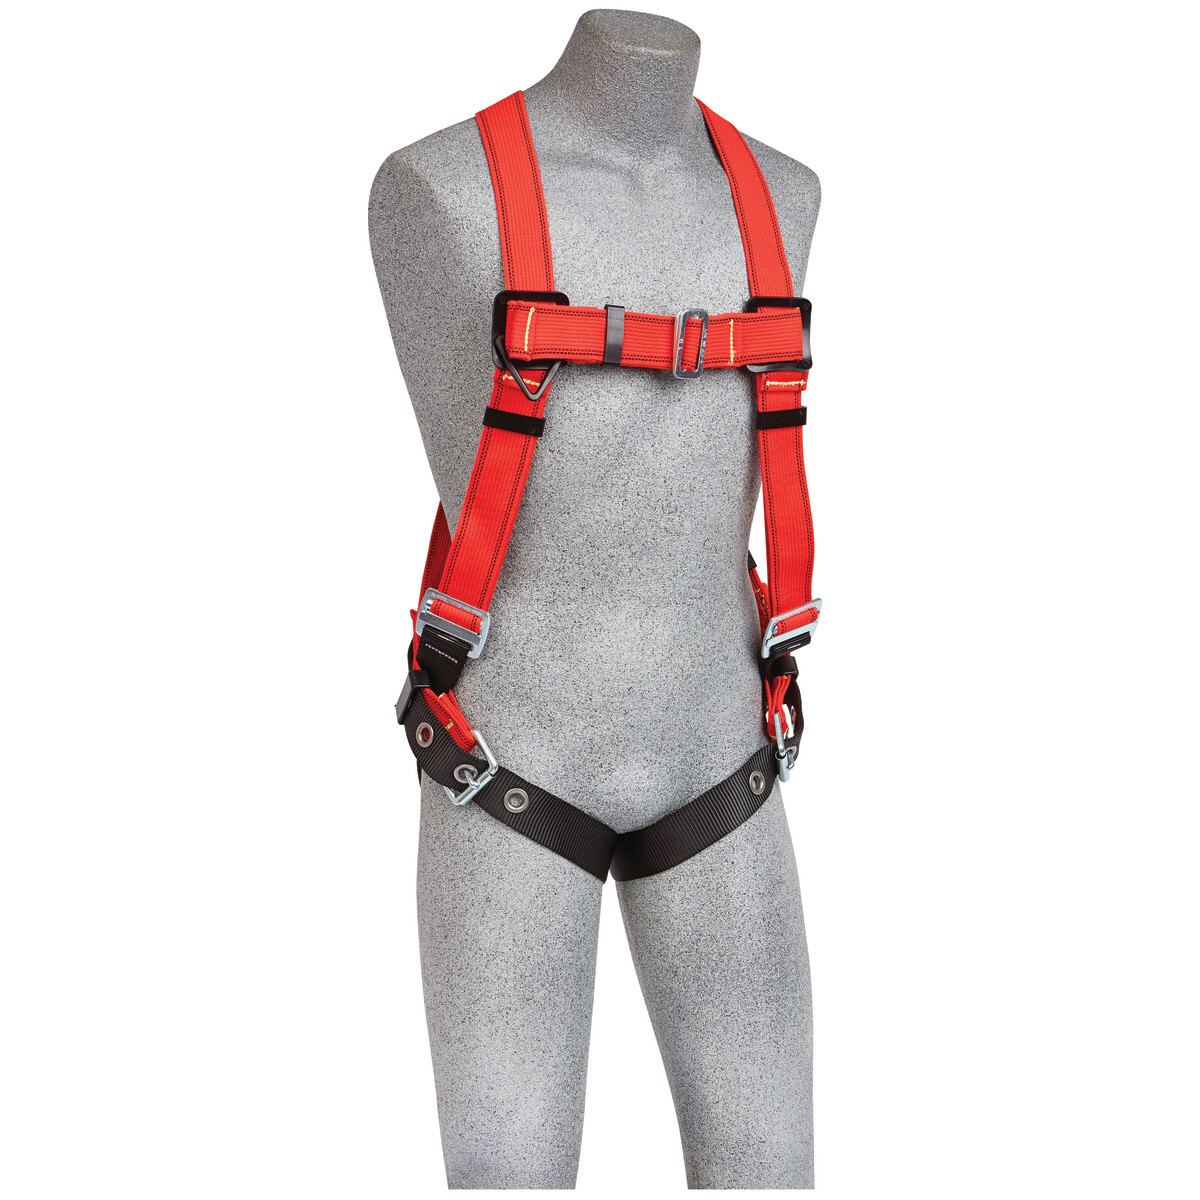 3M™ DBI-SALA® Medium/Large PROTECTA® PRO™ Welder's Vest Style Harness With Back D-Ring And Tongue Buckle Leg Strap